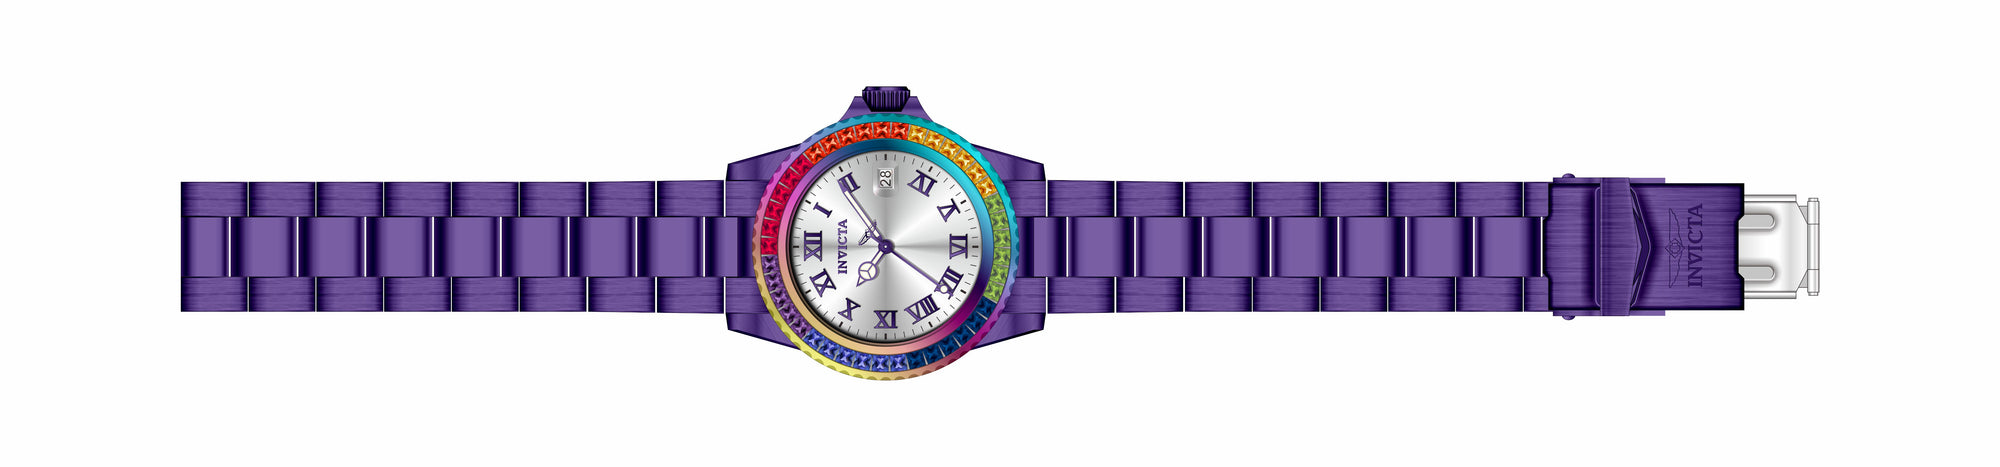 Band for Invicta Angel Zager Exclusive Lady 40232